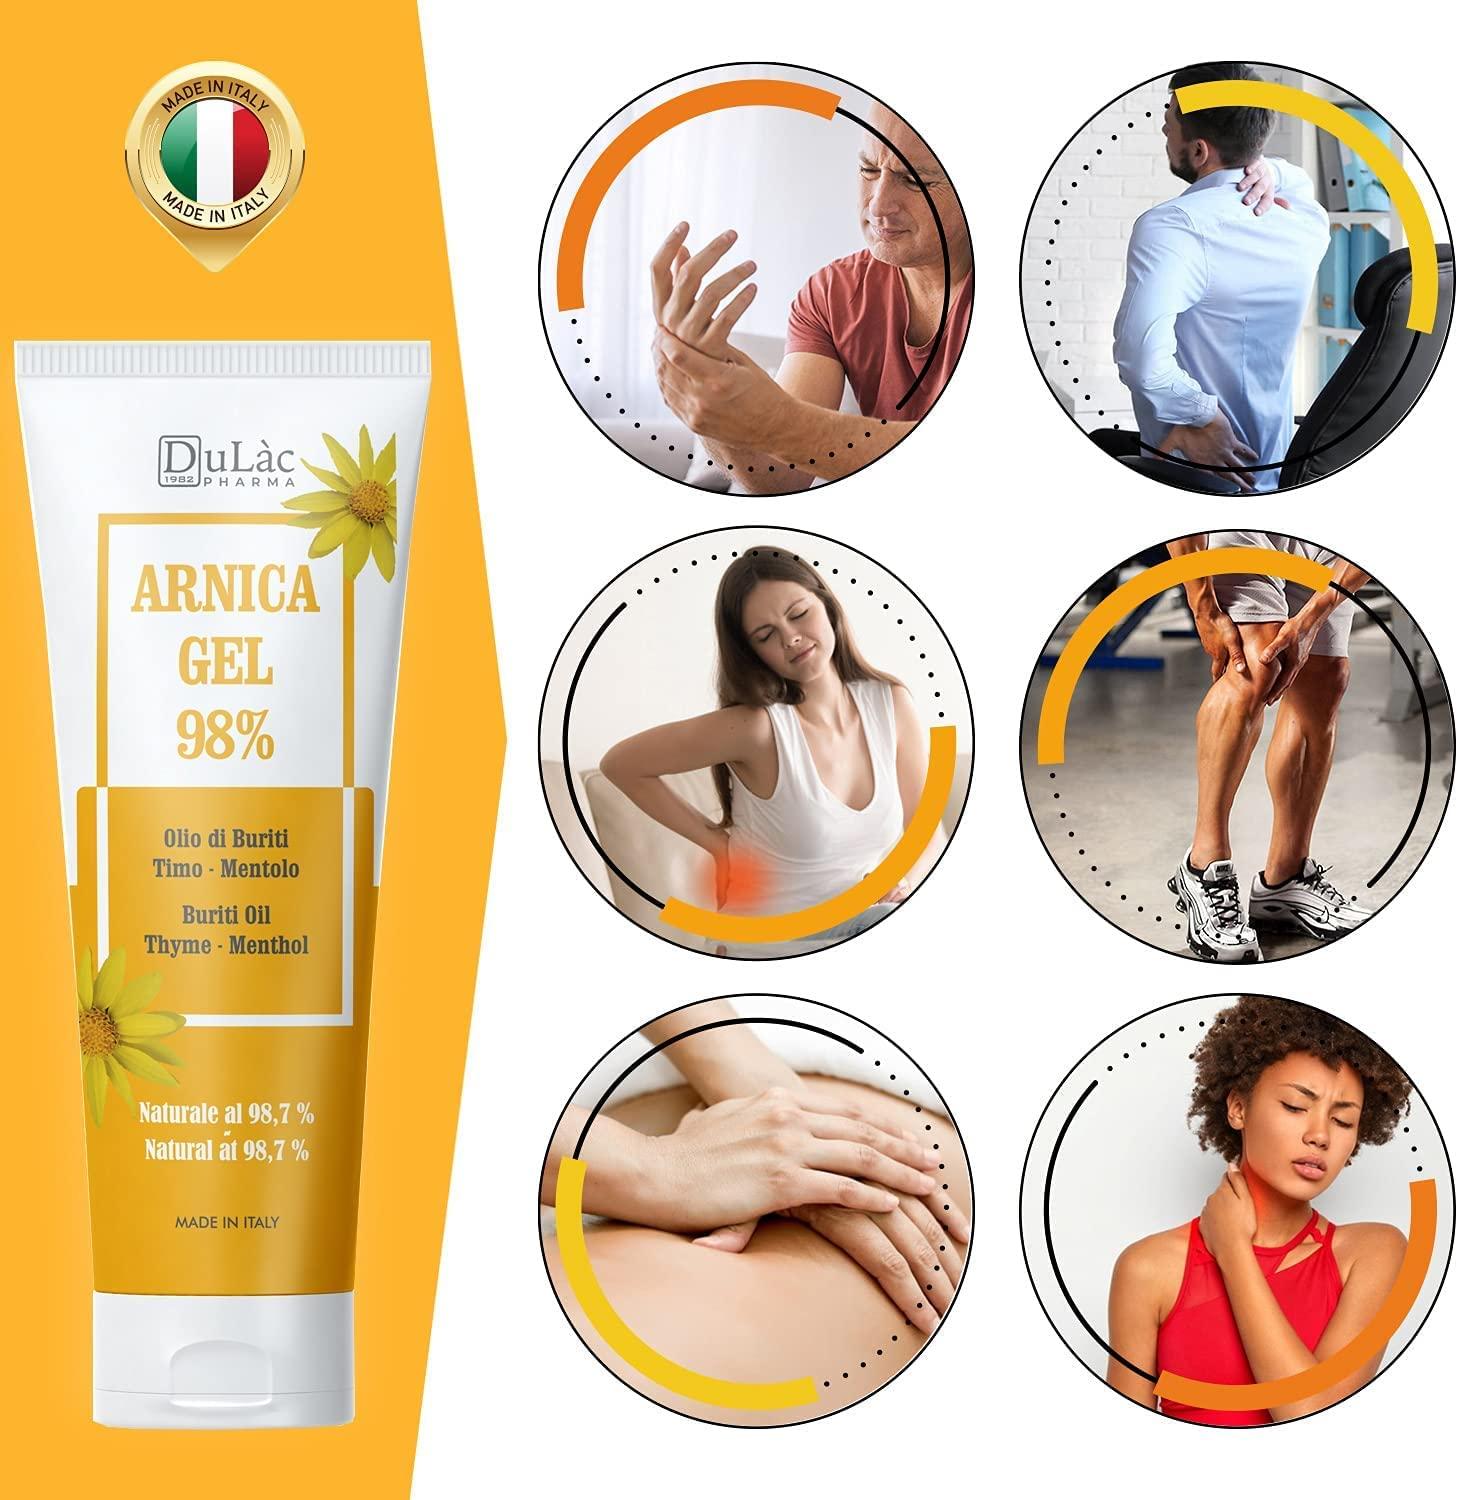 Arnica Gel for Bruising and Swelling Maximum Strength (98%) 3.38 Fl Oz for  Muscle and Joint Relief, Cool Effect and Natural Formula, Dermatologically  Tested - Dulàc Made in Italy 3.38 Fl Oz (Pack of 1)